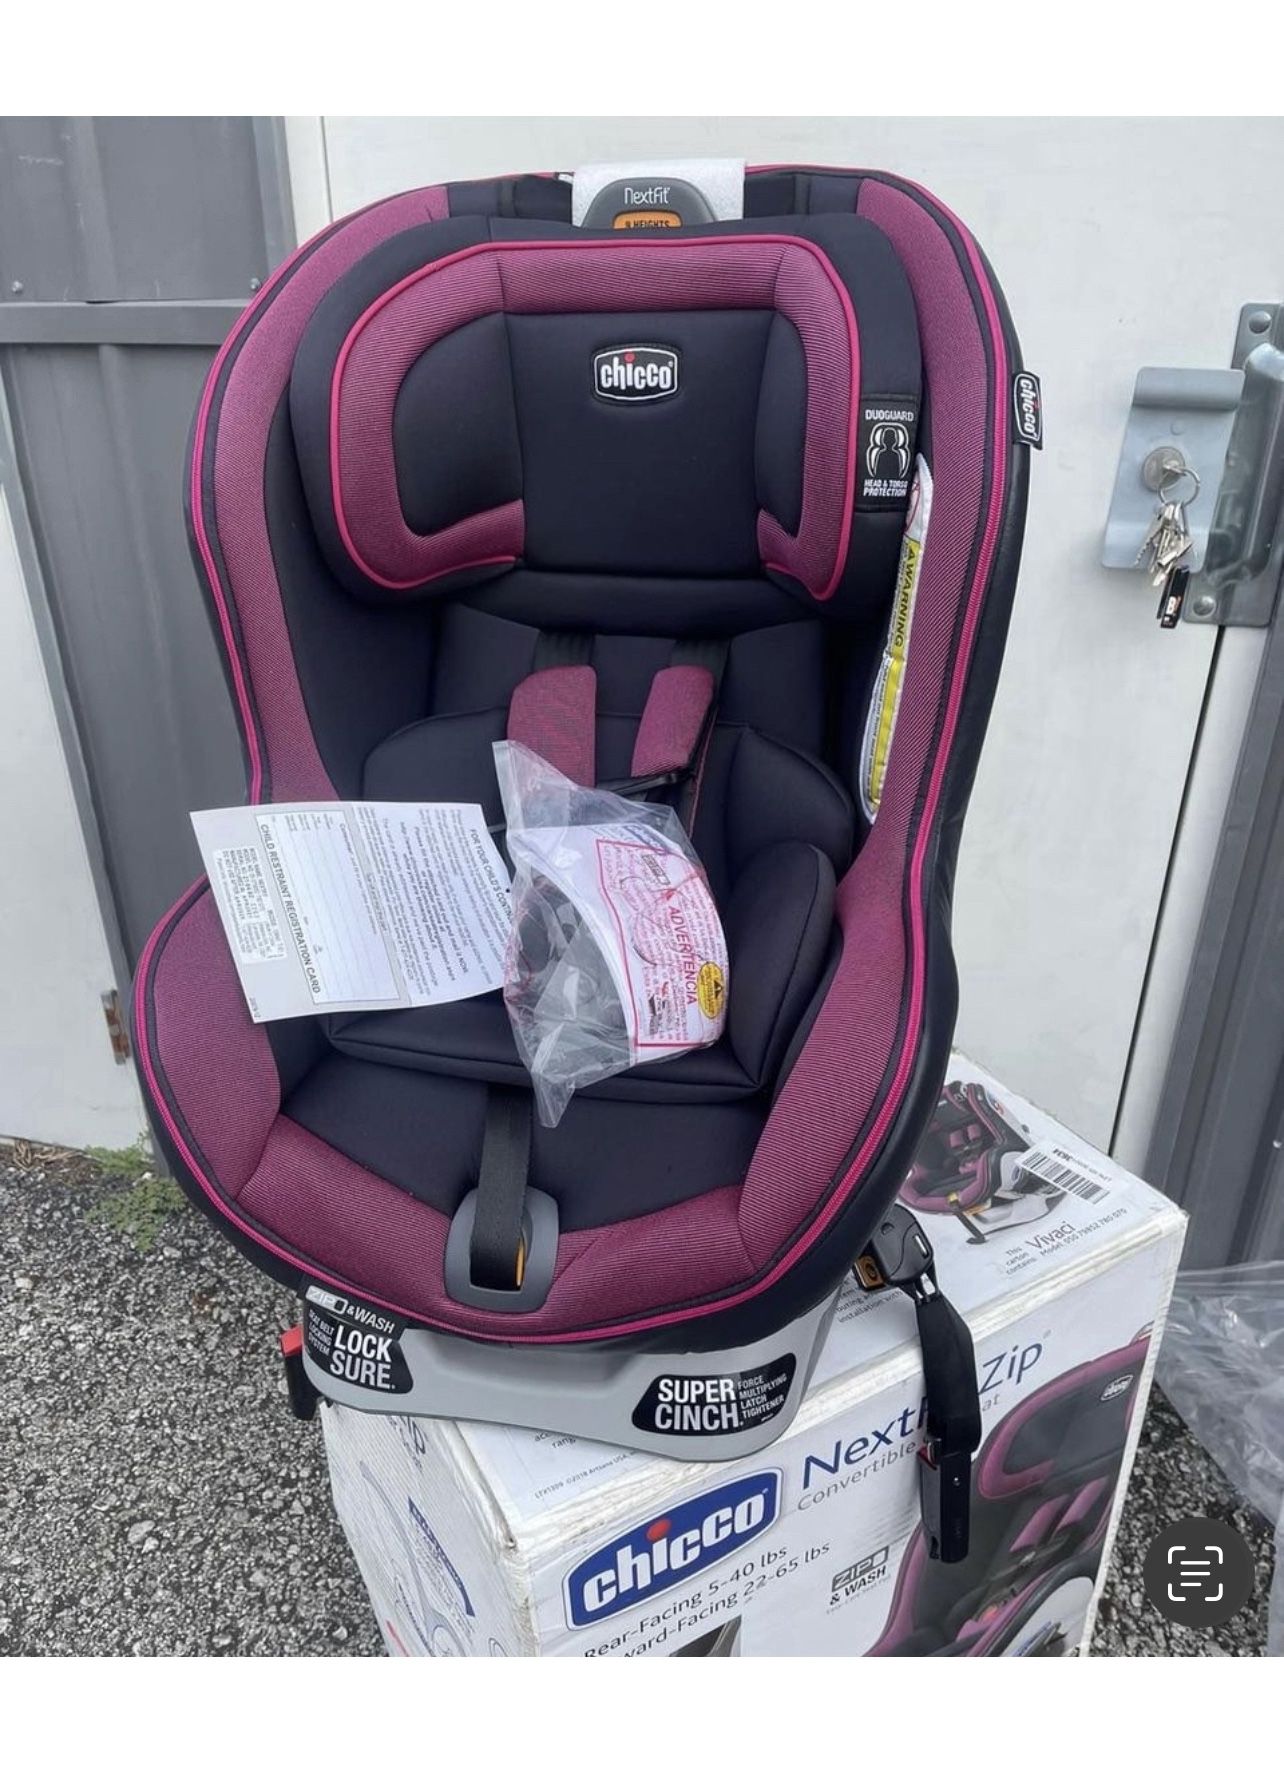 New Chicco Convertible Car Seat 